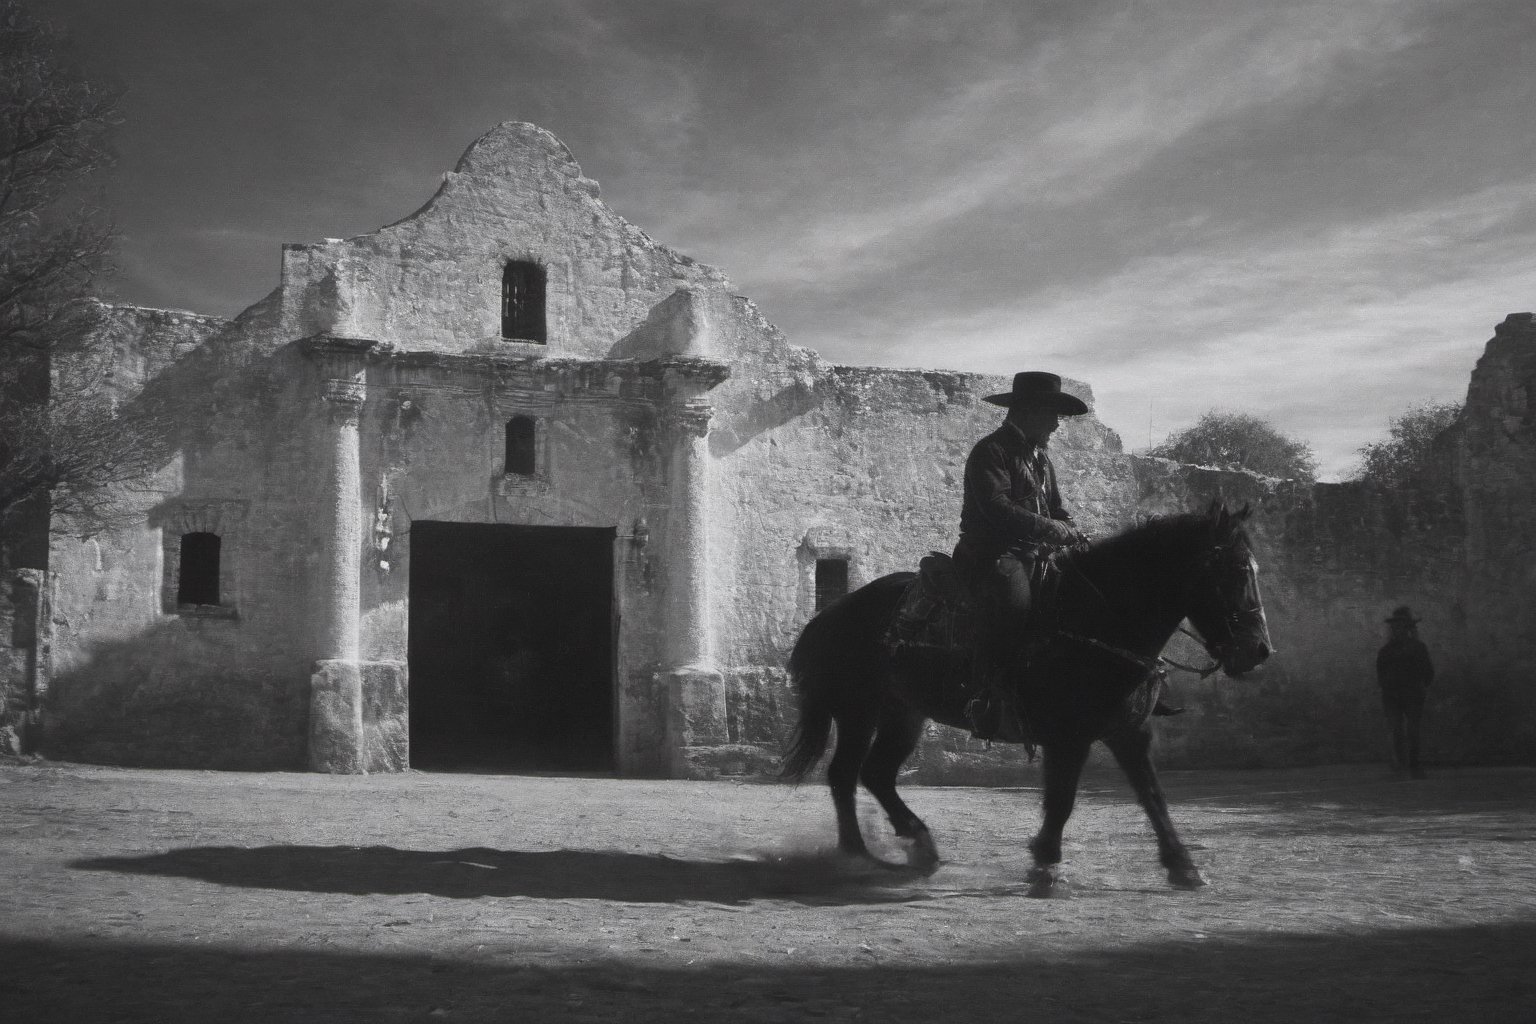 ansel adams style photo of a charro rider in front of the alamo, high contrast photo